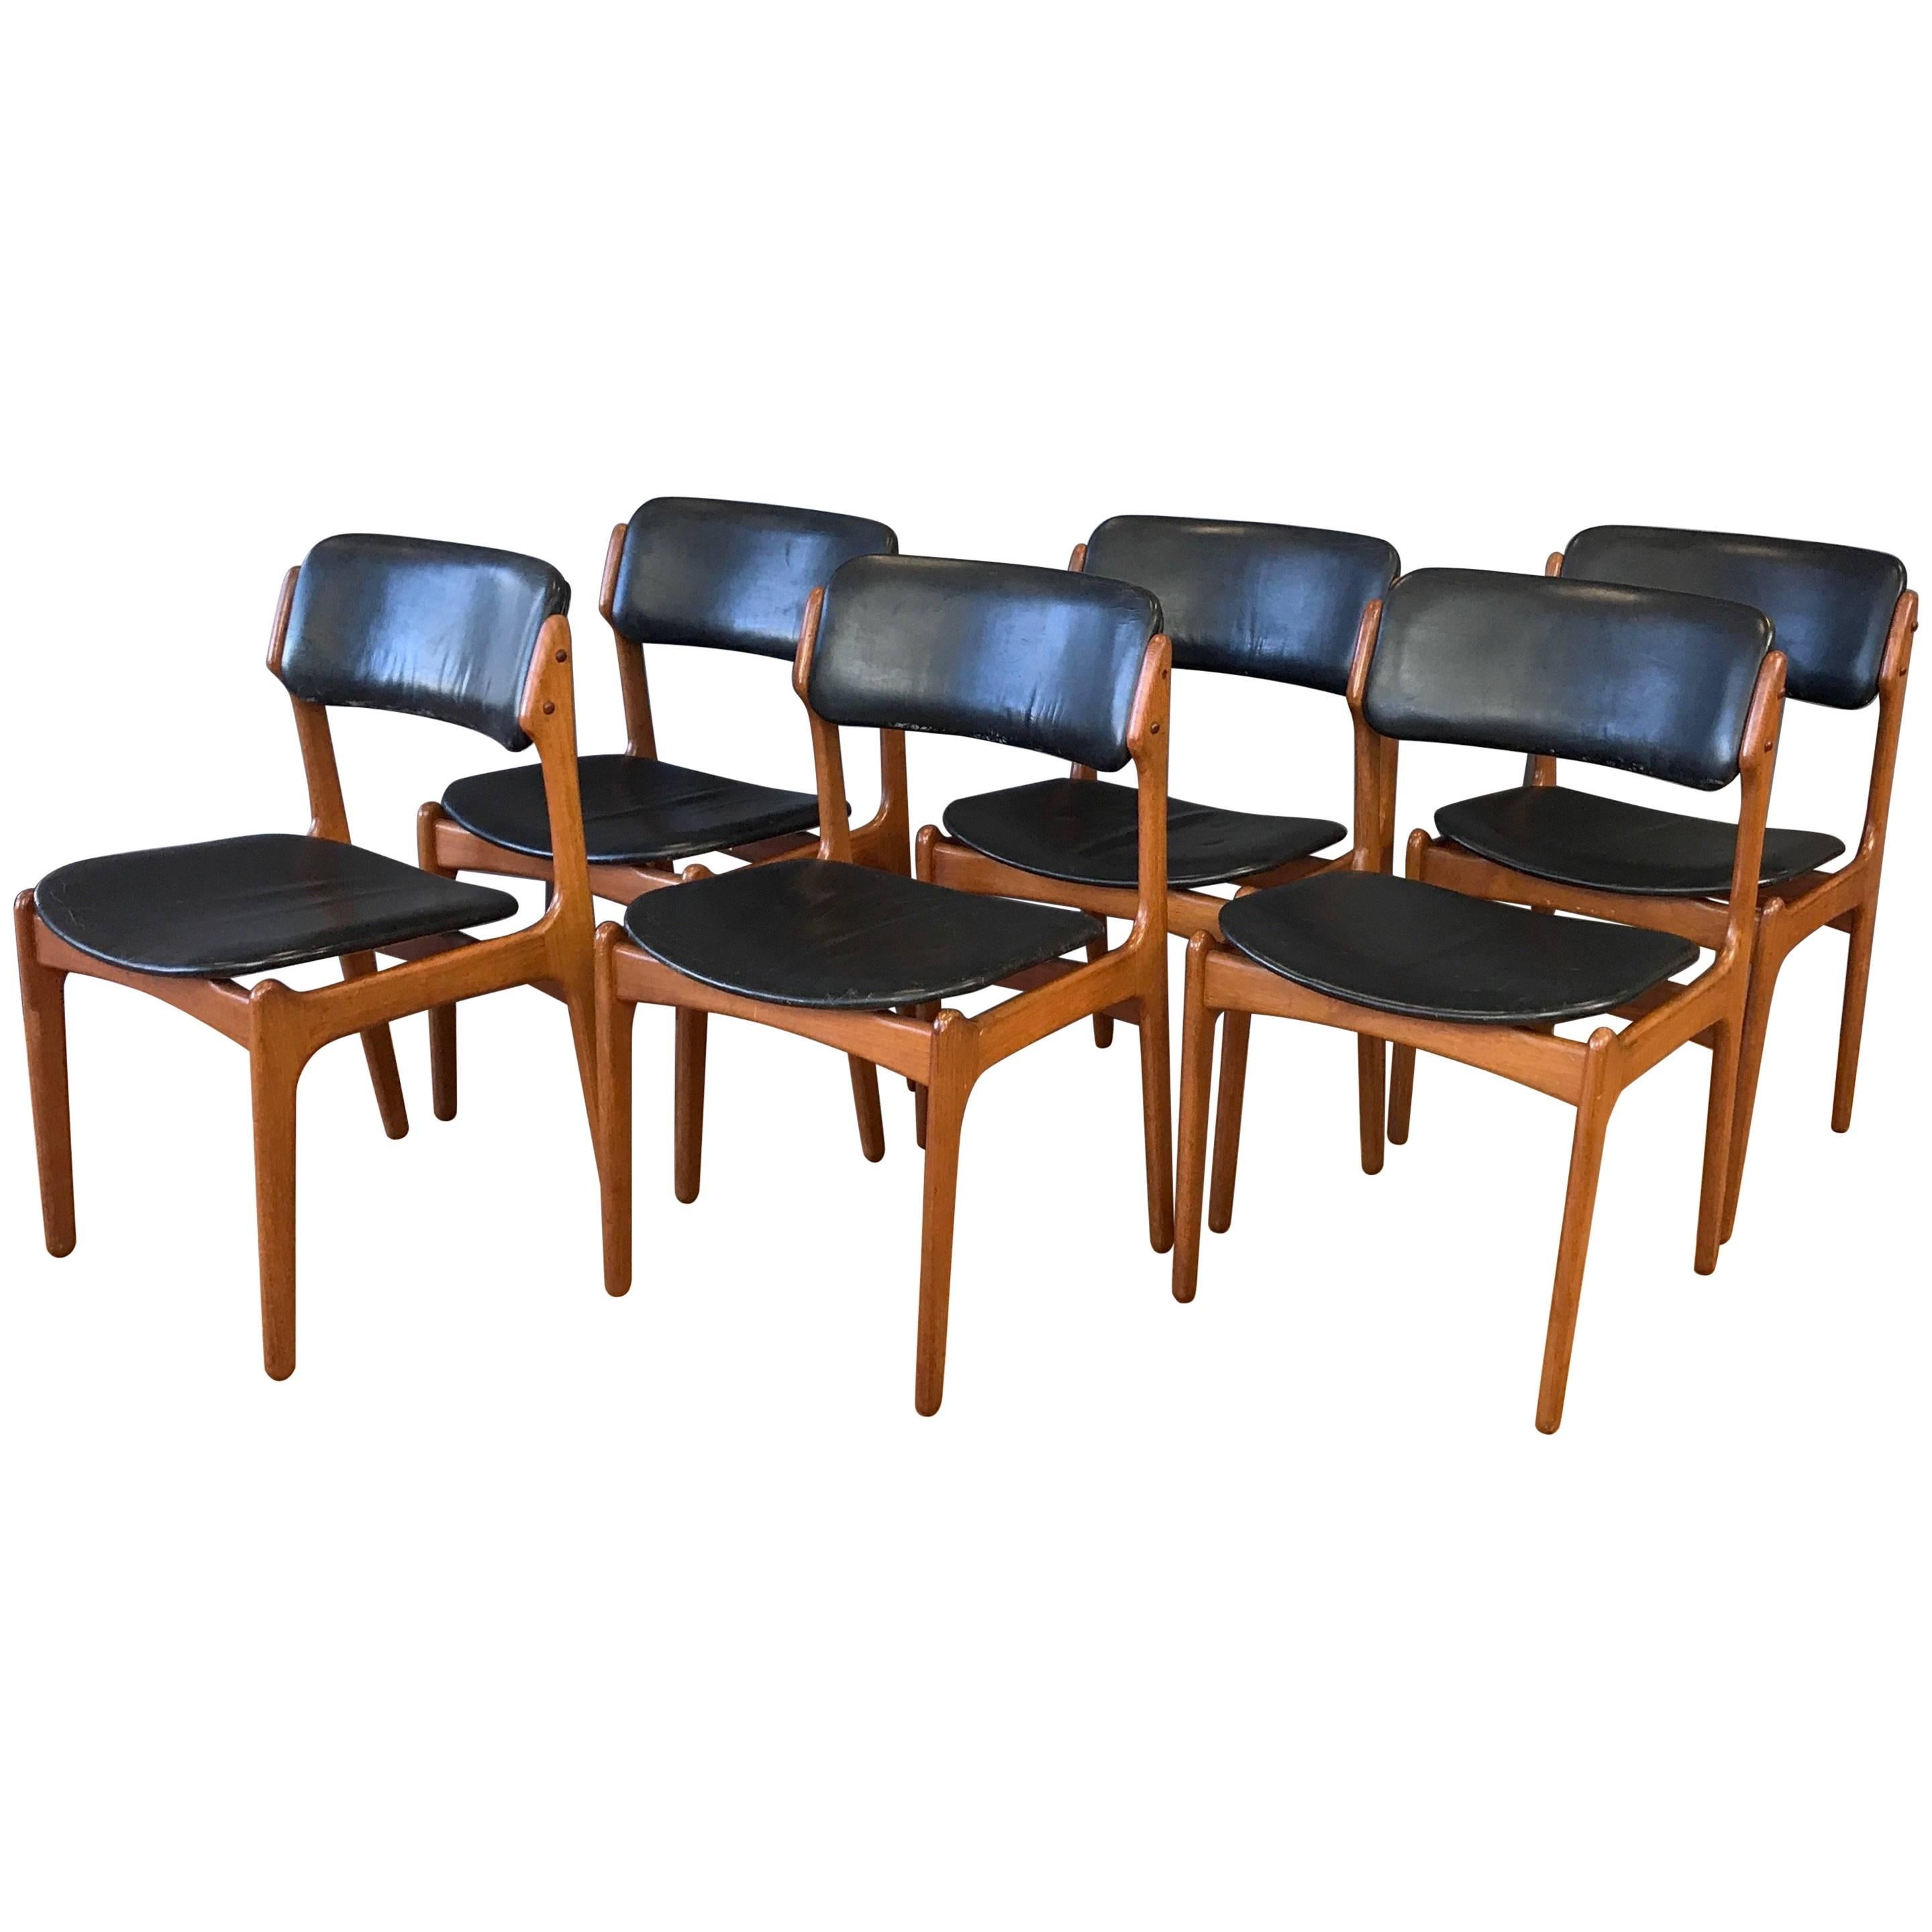 Set of Six Erik Buch for O.D. Møbler OD-49 Teak and Leather Dining Chairs